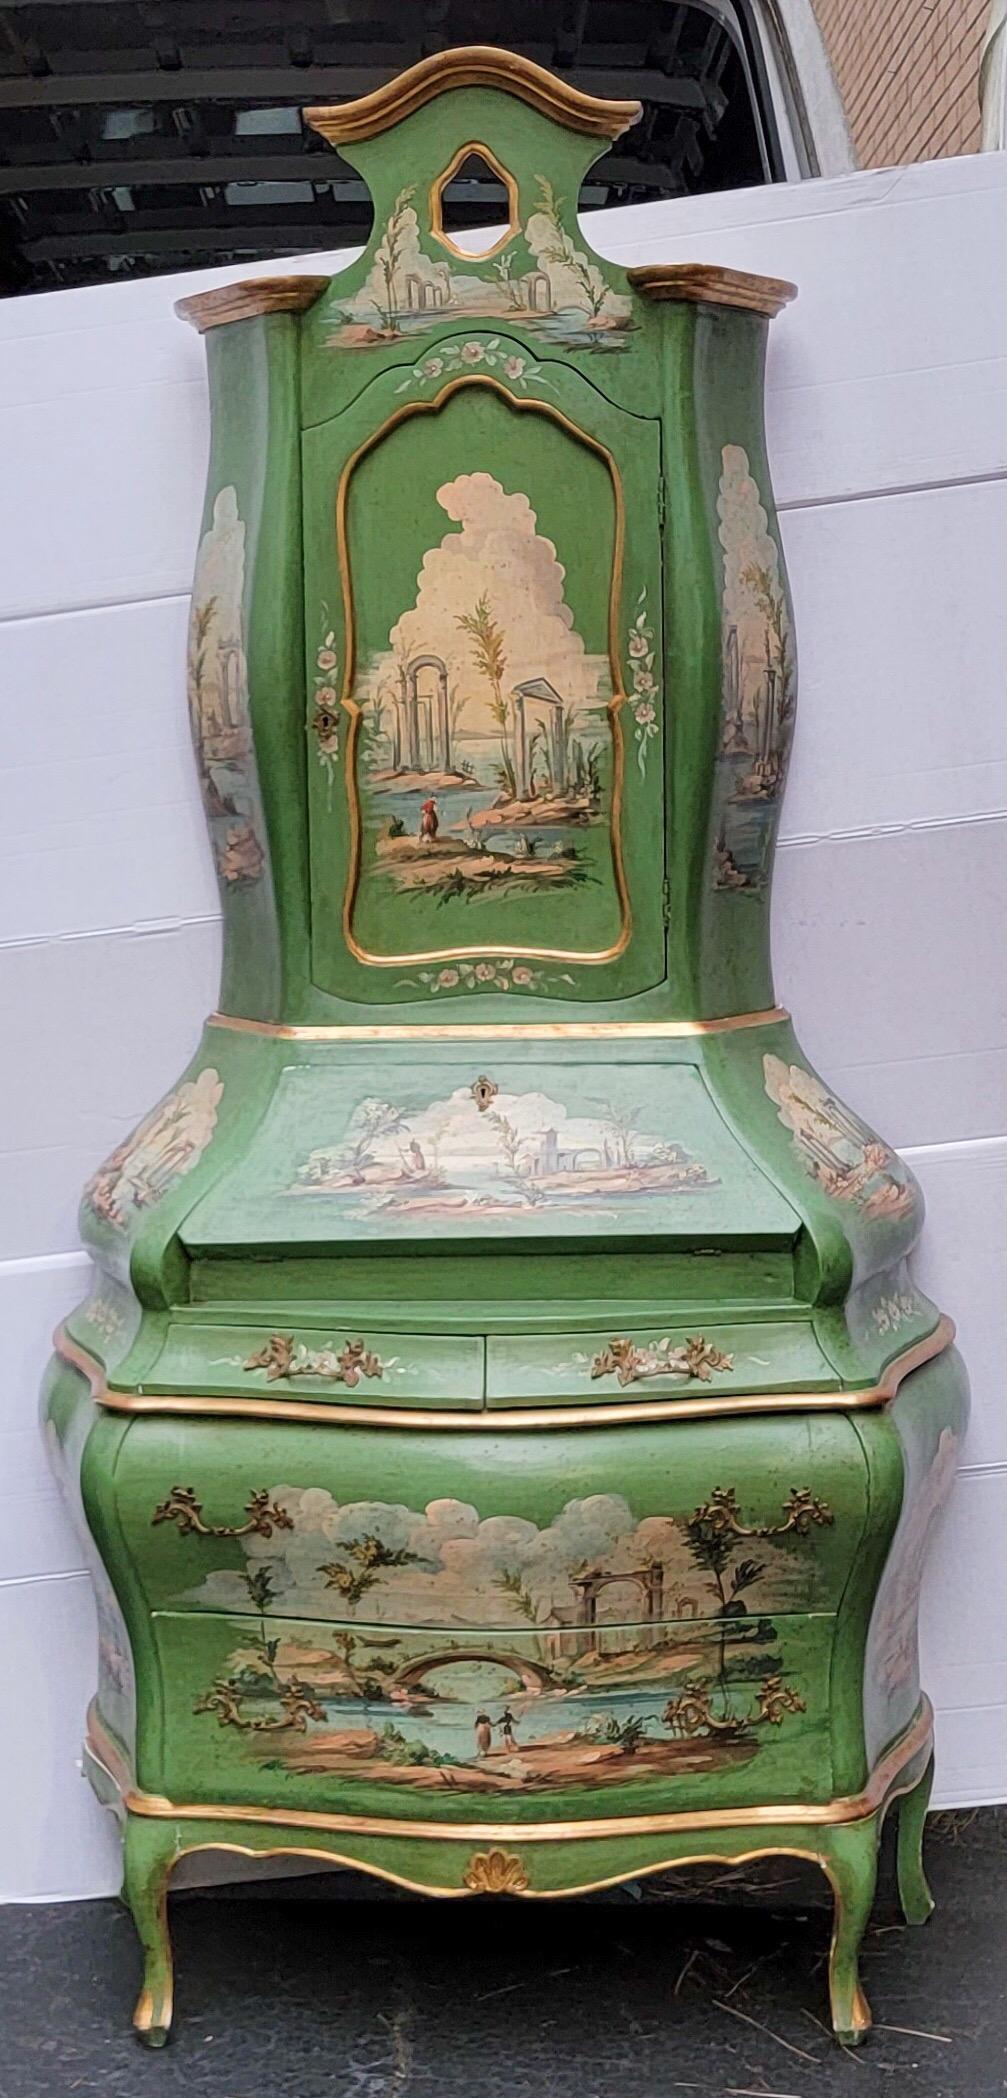 This is a 1960s hand painted Venetian bombay form secretary. It is a wonderful shade of green with Italian pastoral scenes throughout. It is in very good condition.